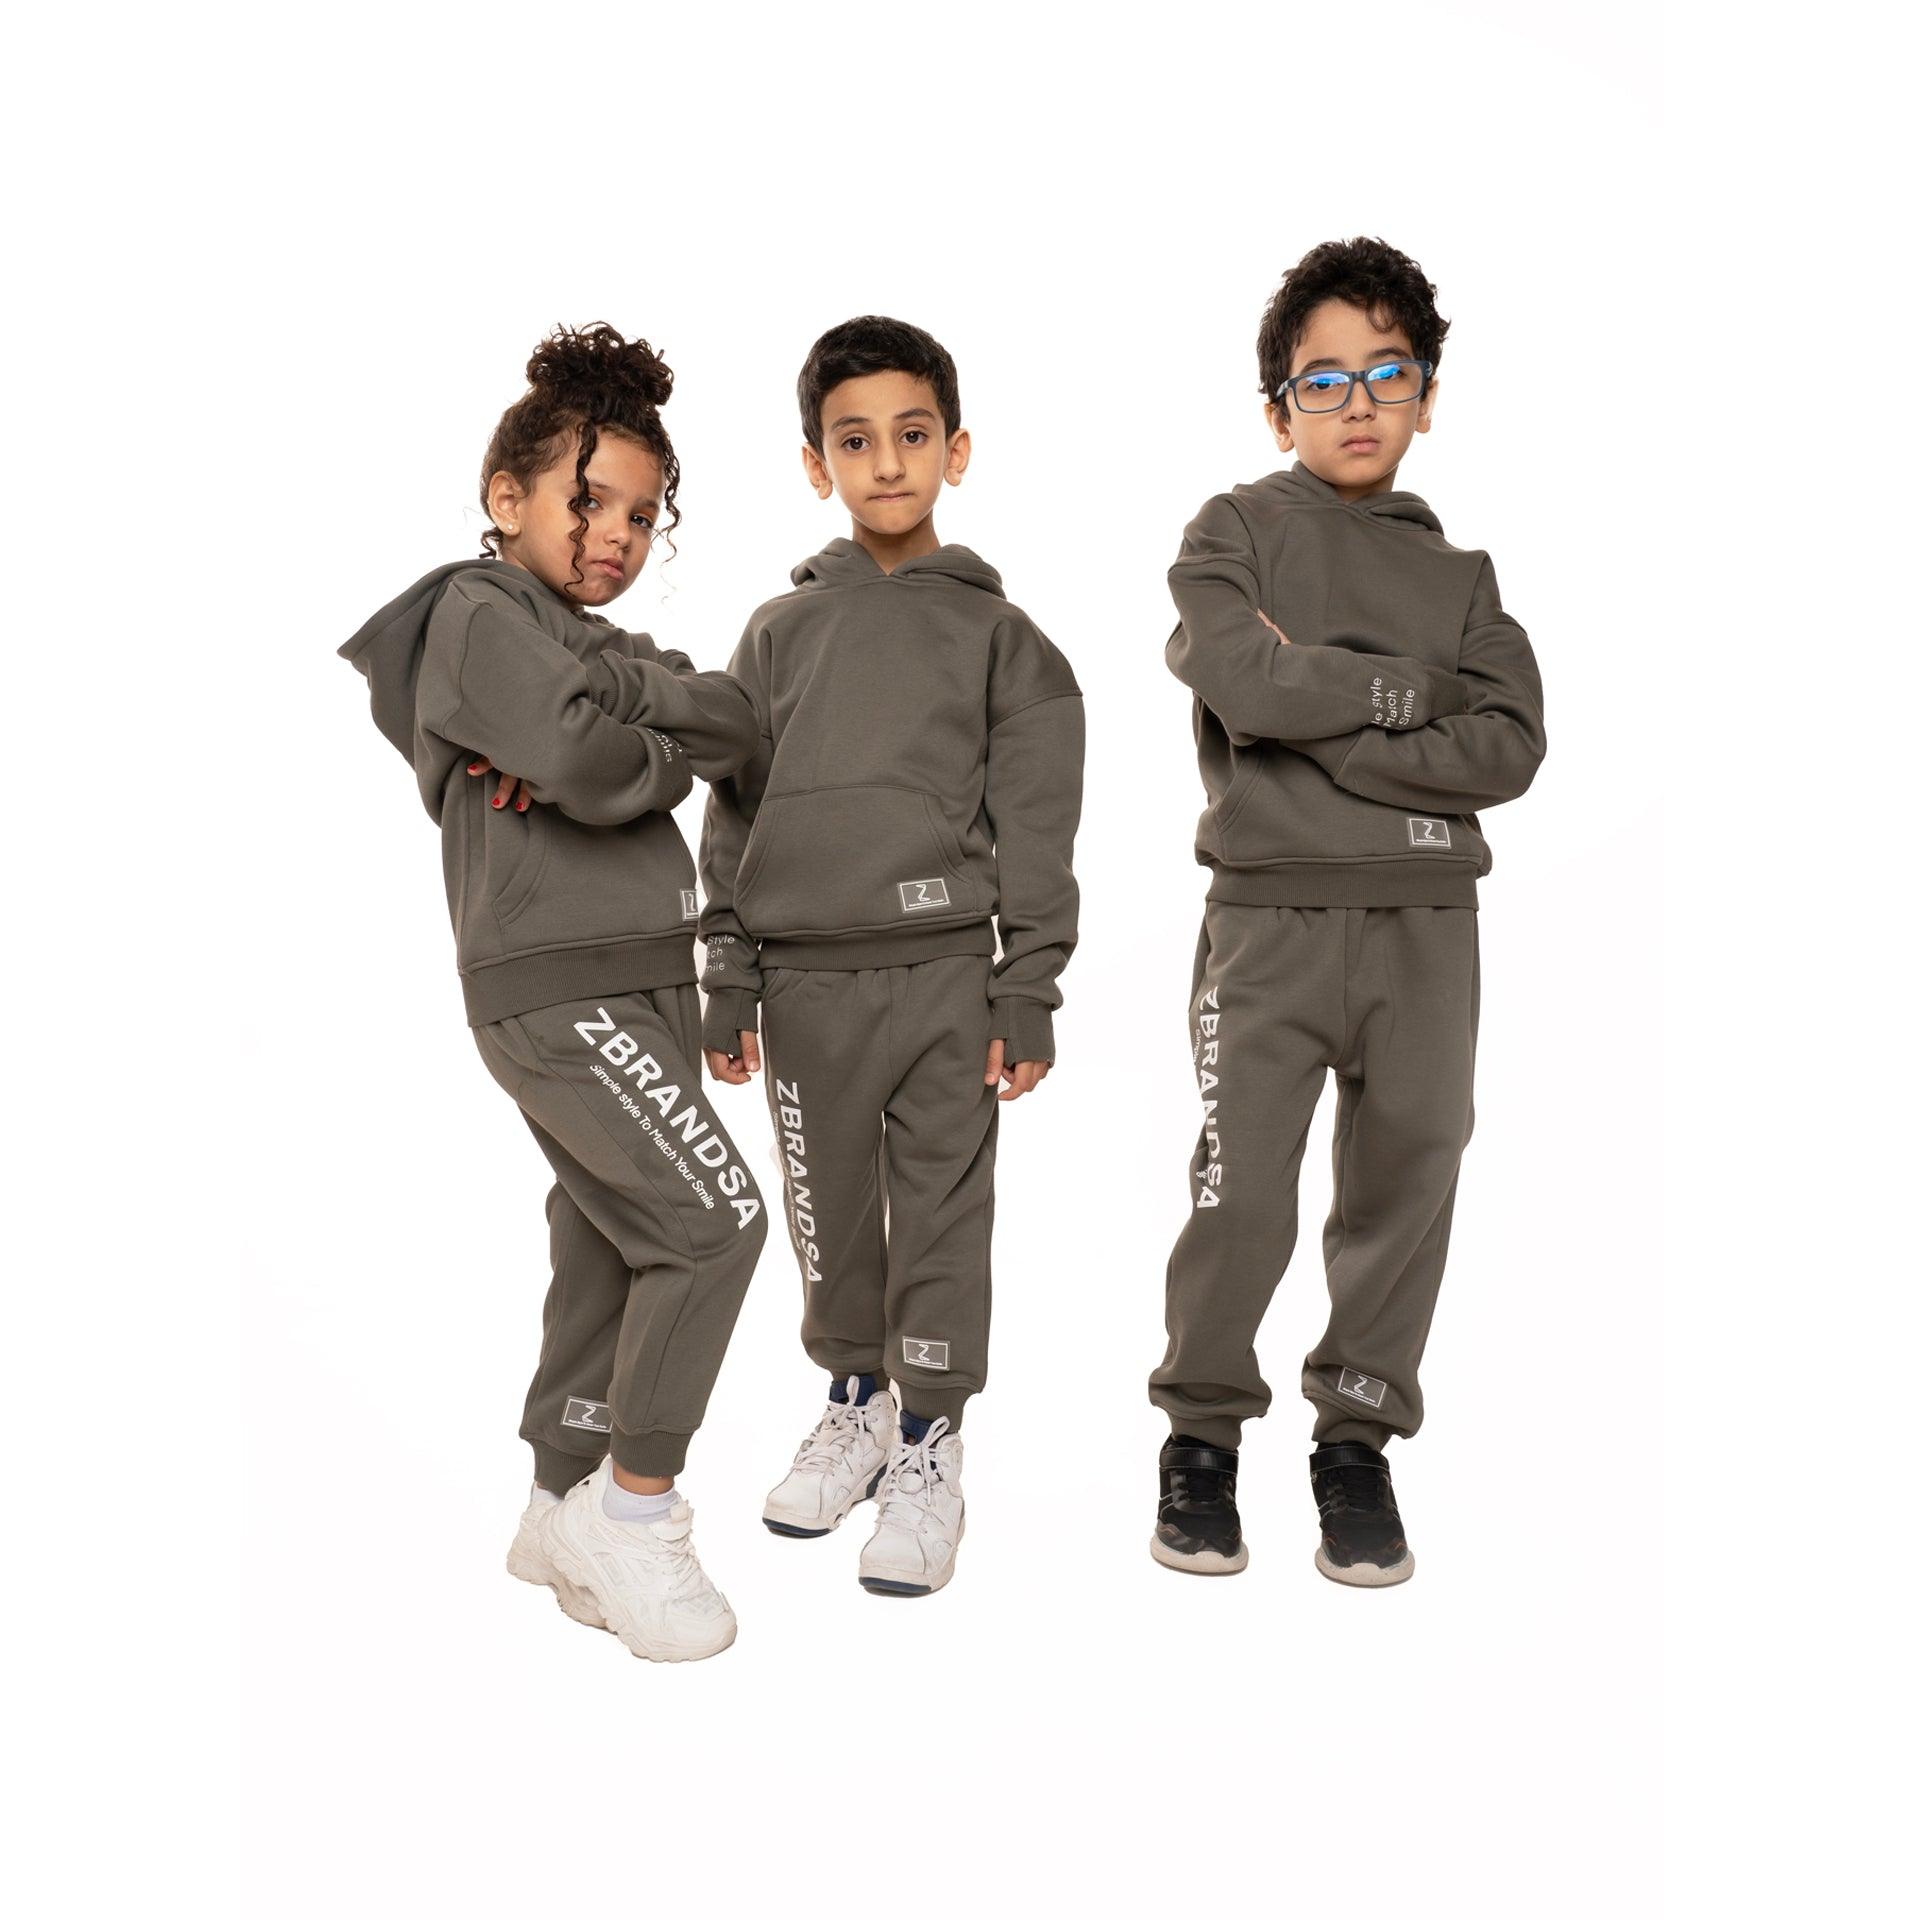 kids¬†set Gray hoodie and pants From Z Brand - WECRE8